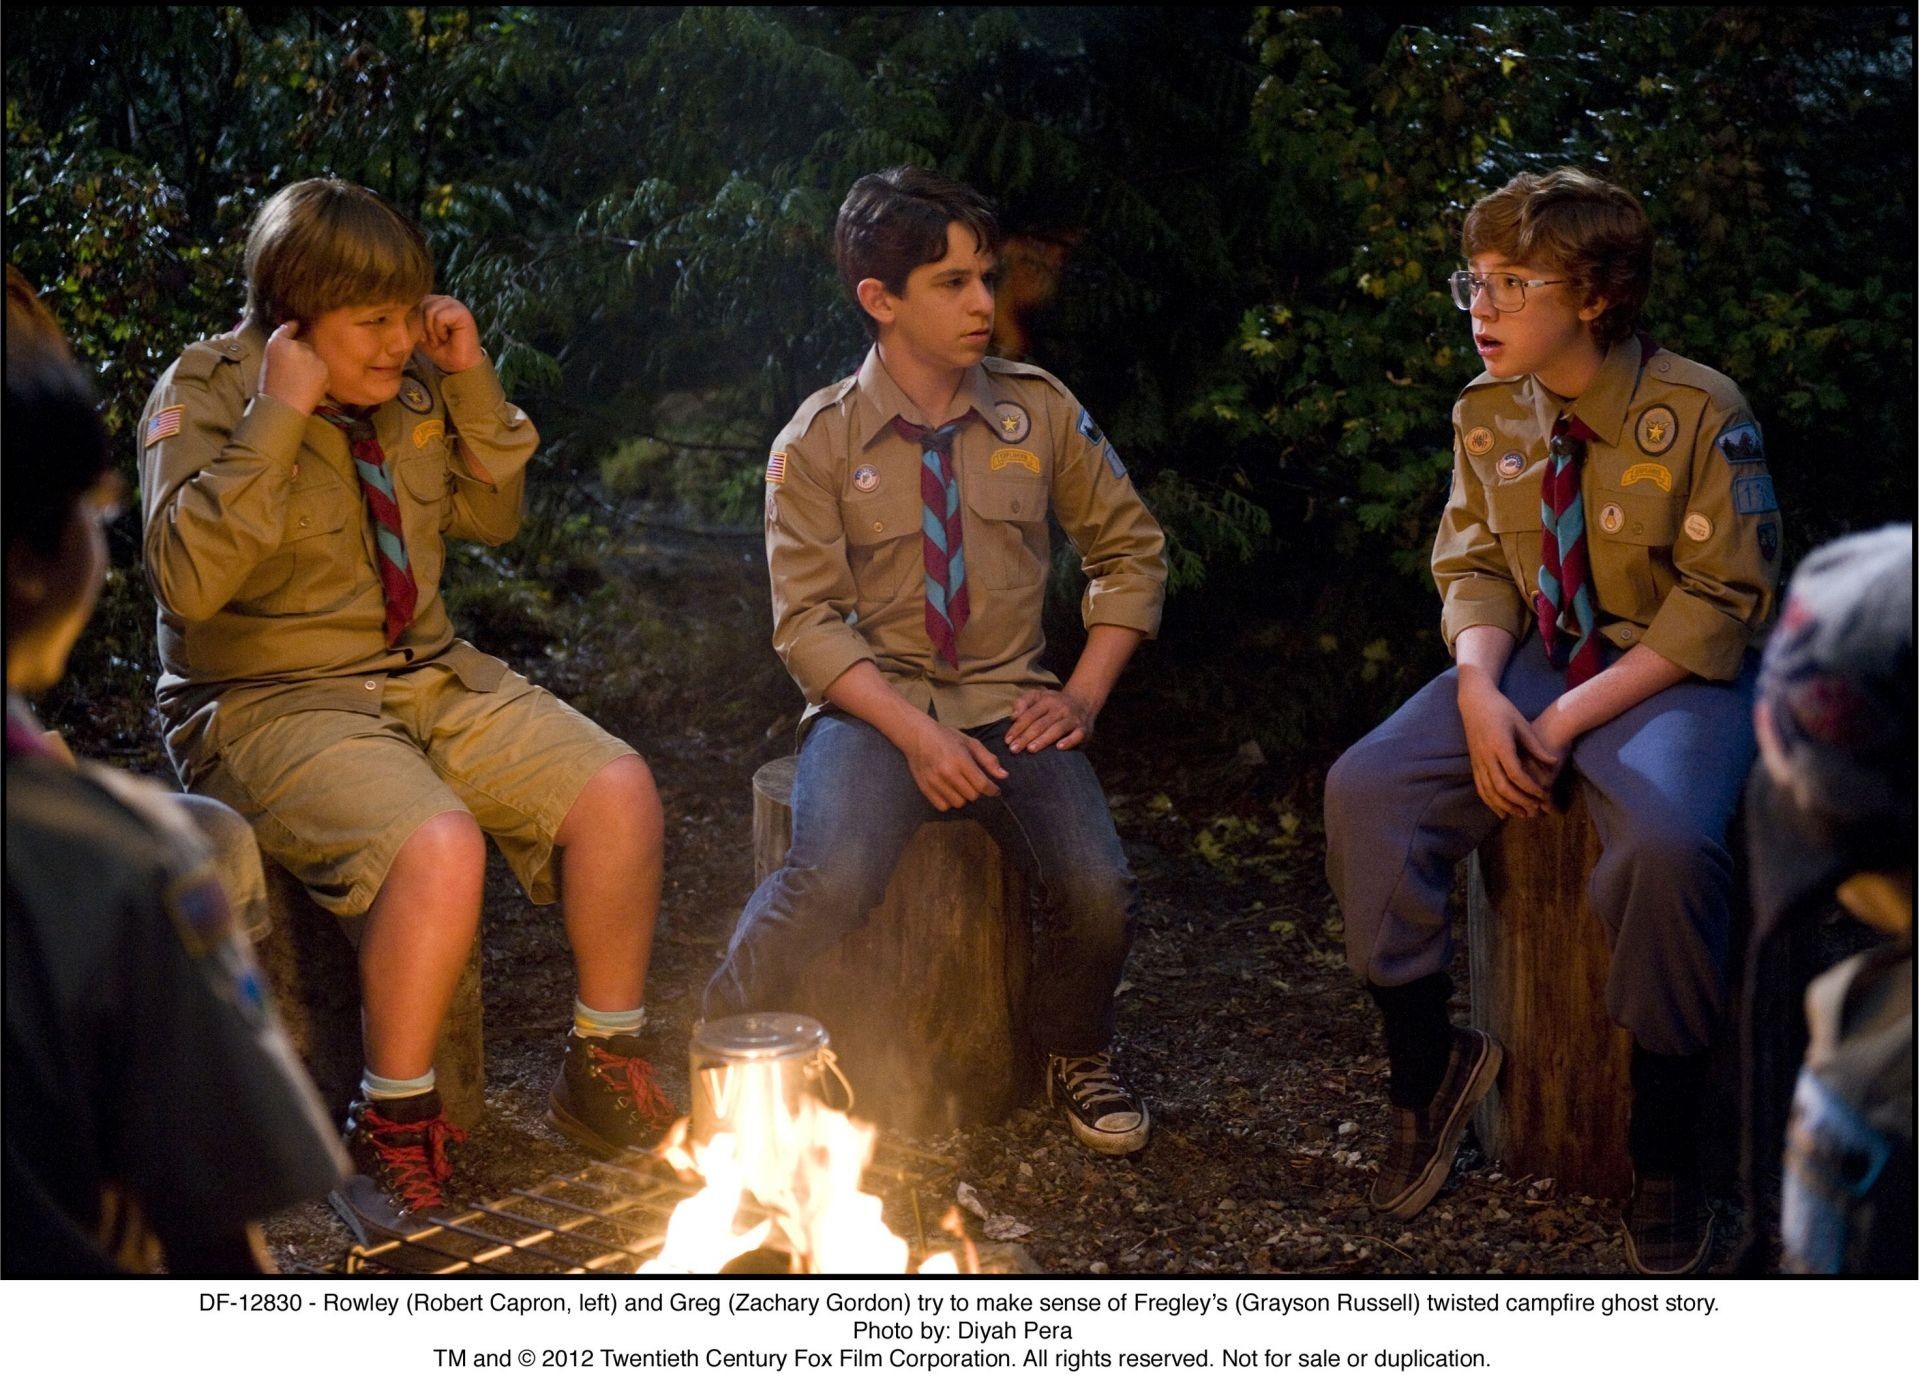 Robert Capron, Zachary Gordon and Grayson Russell in The 20th Century Fox's Diary of a Wimpy Kid: Dog Days (2012). Photo credit by Diyah Pera.